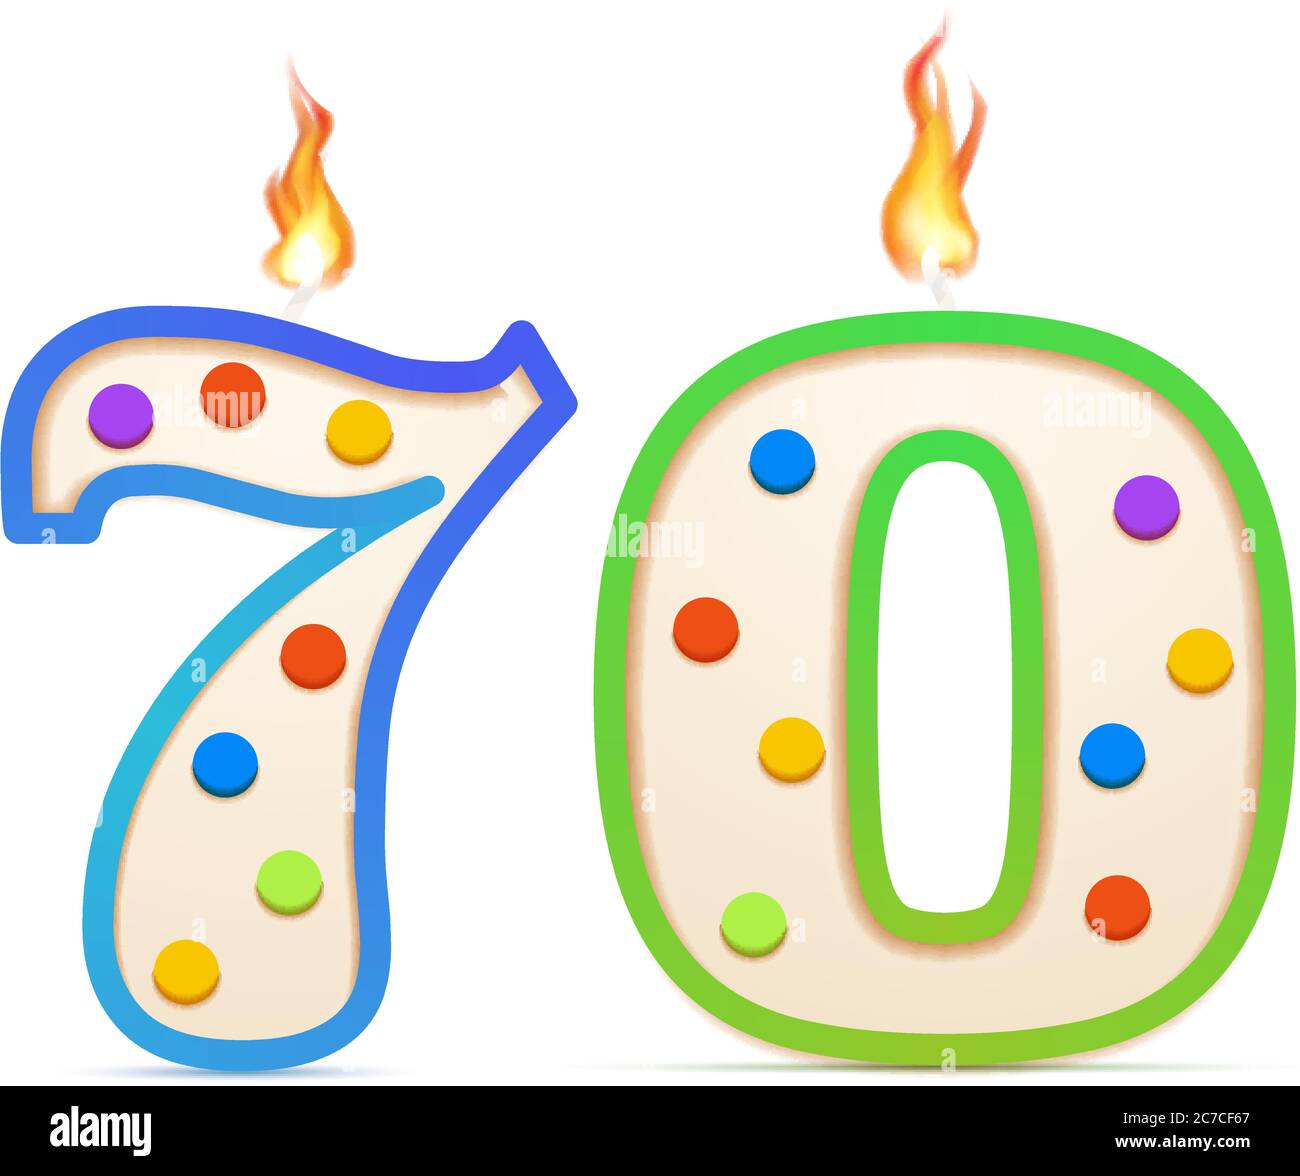 https://c8.alamy.com/comp/2C7CF67/seventy-years-anniversary-70-number-shaped-birthday-candle-with-fire-on-white-2C7CF67.jpg